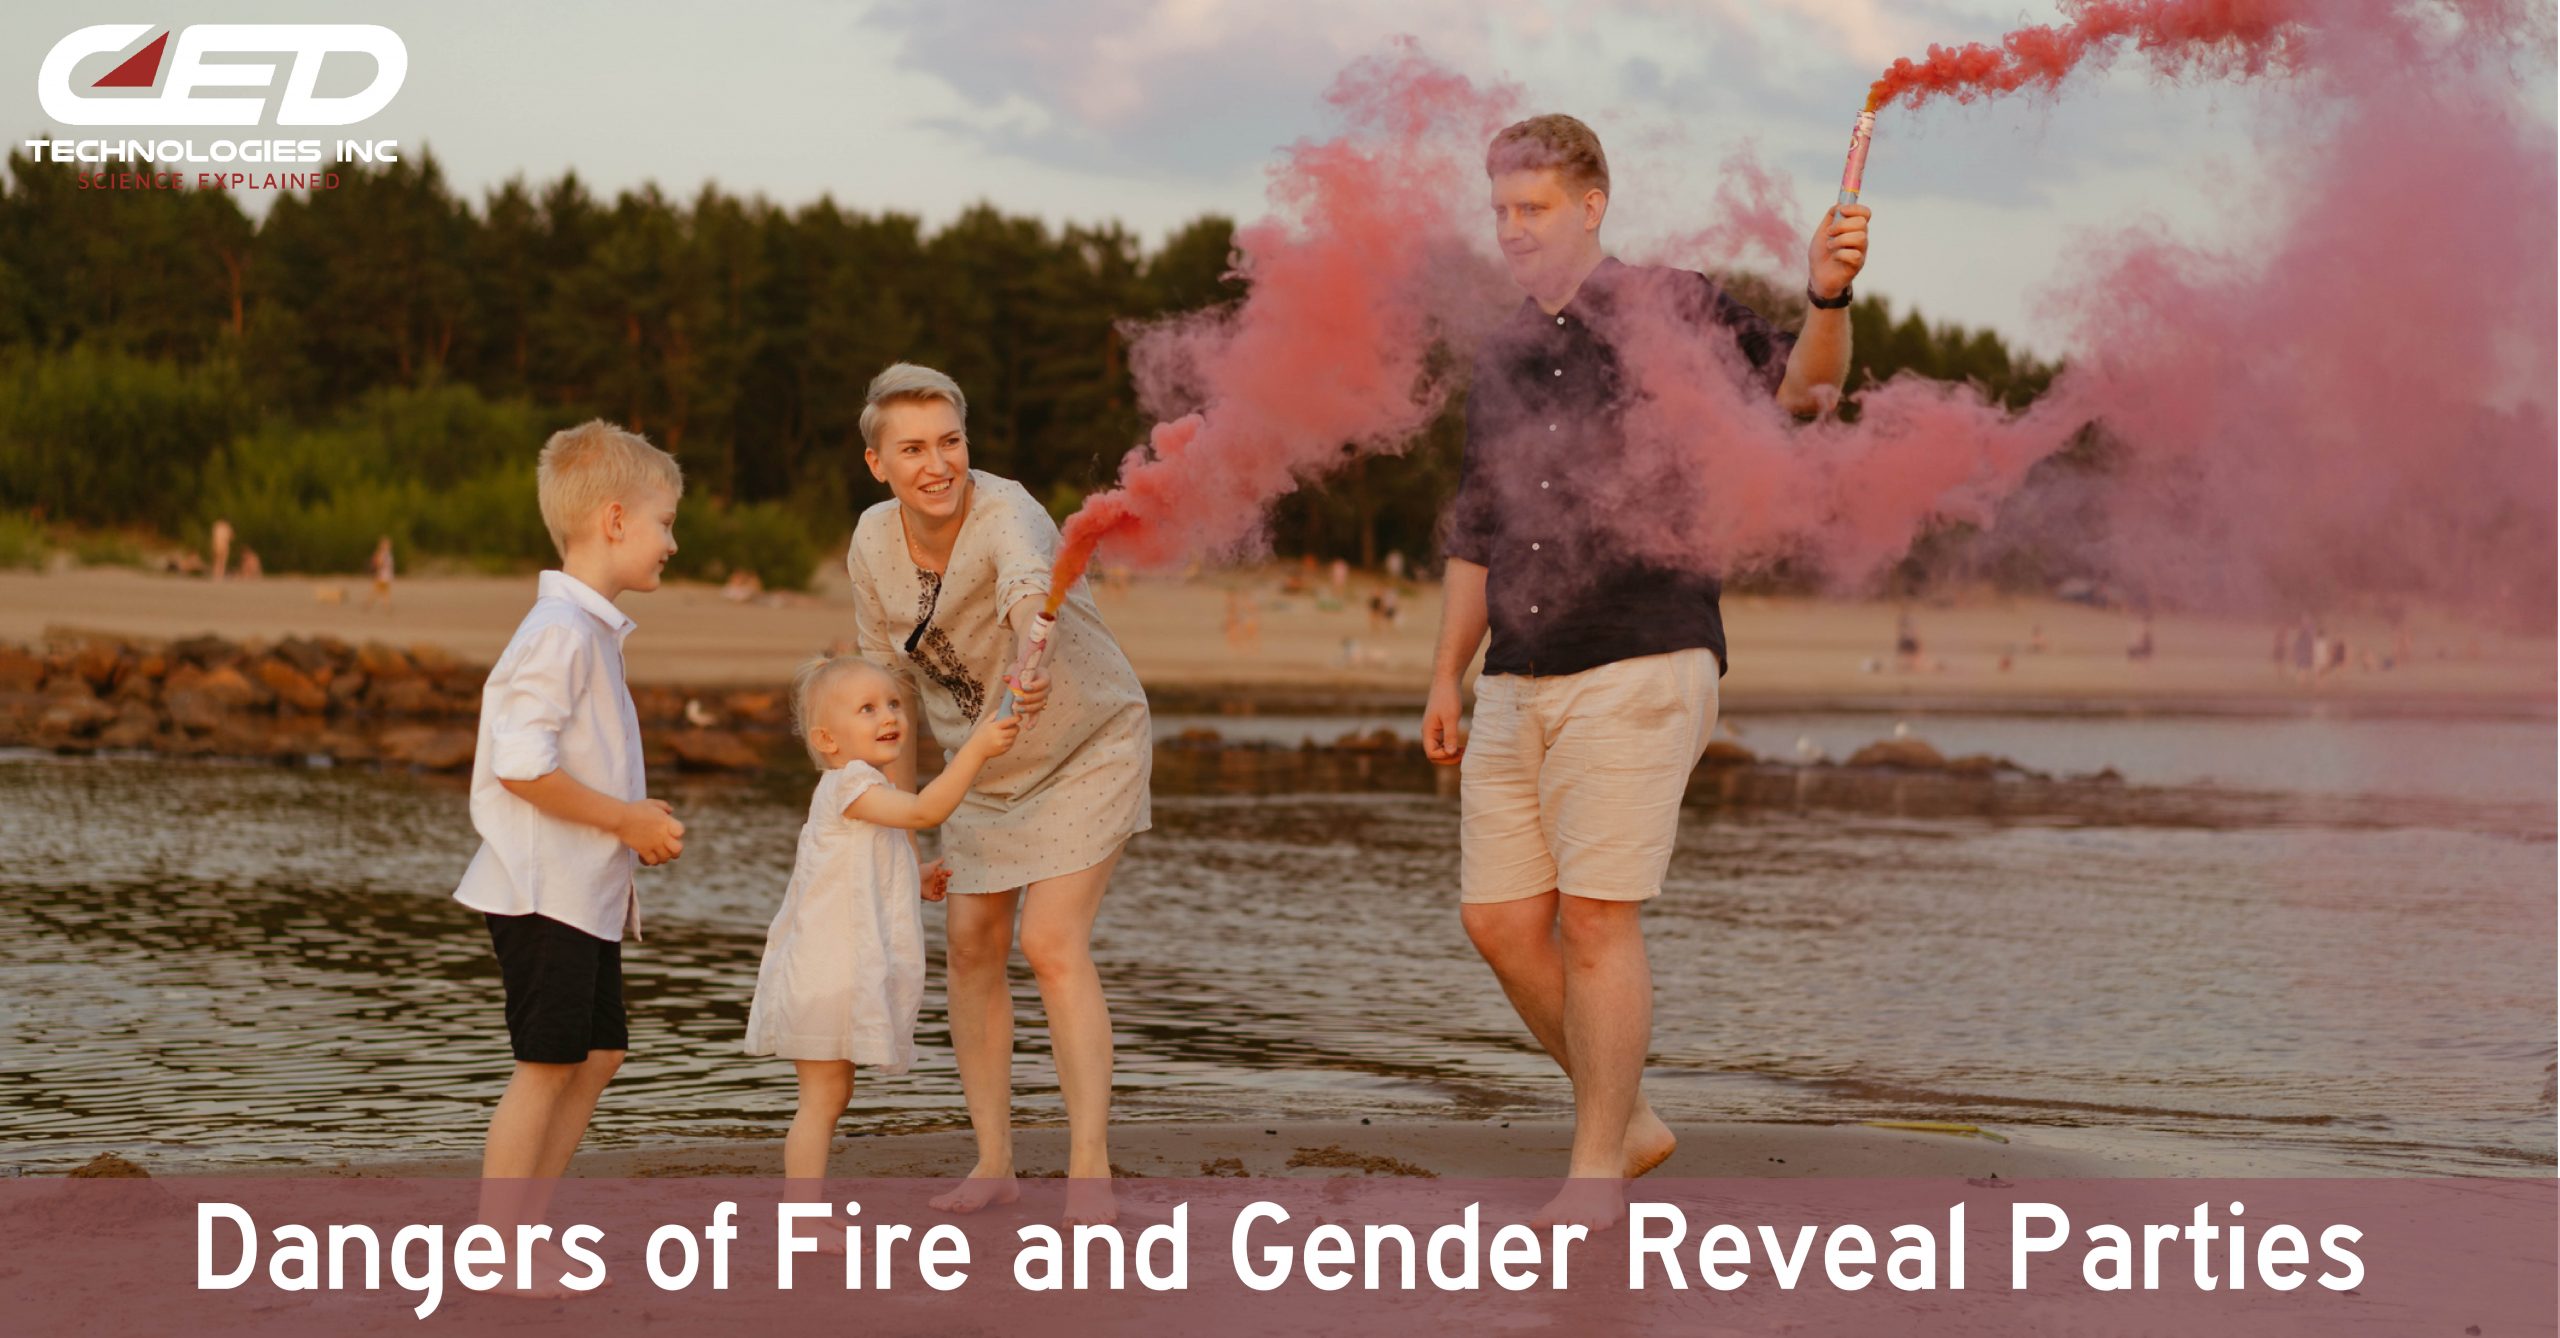 The Explosive Nature of Gender Reveal Parties